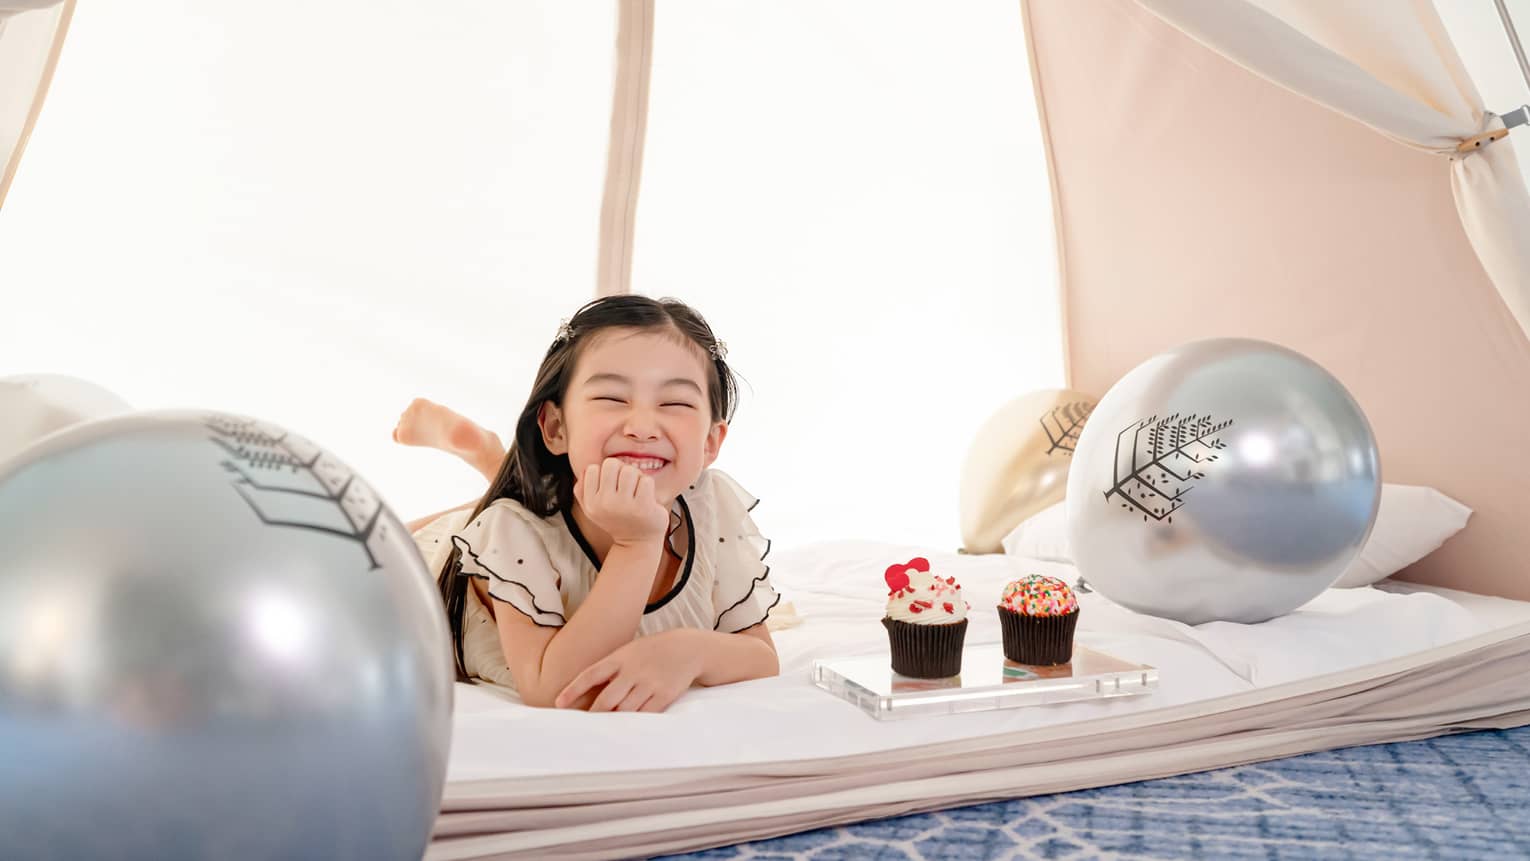 Smiling young girl in in-room kids? tent with gold and silver balloons and cupcakes